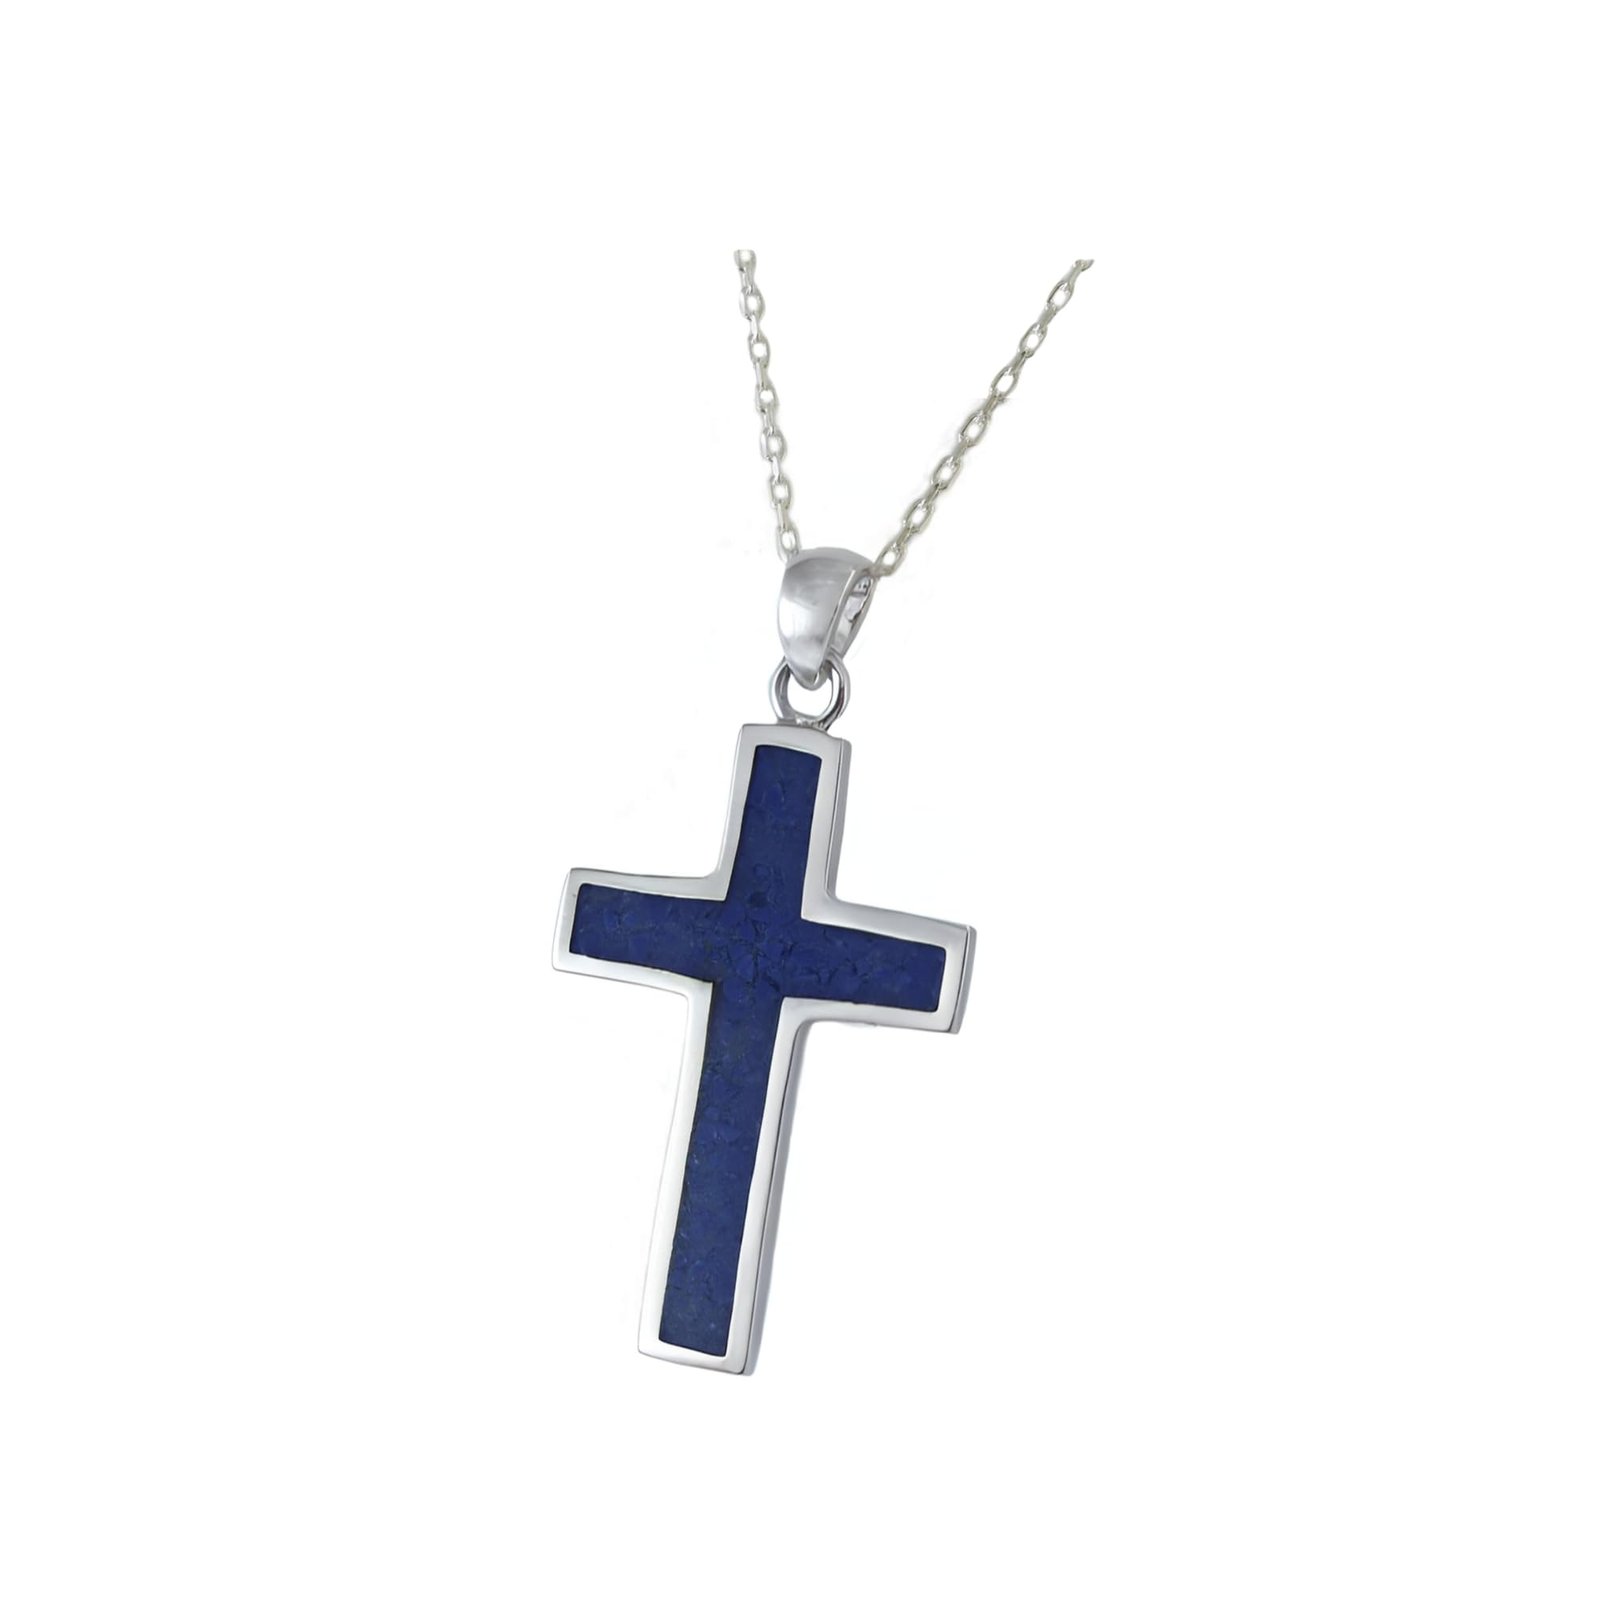 Handmade Navy Blue Lapis Lazuli Sterling Silver Cross 1.19 inches